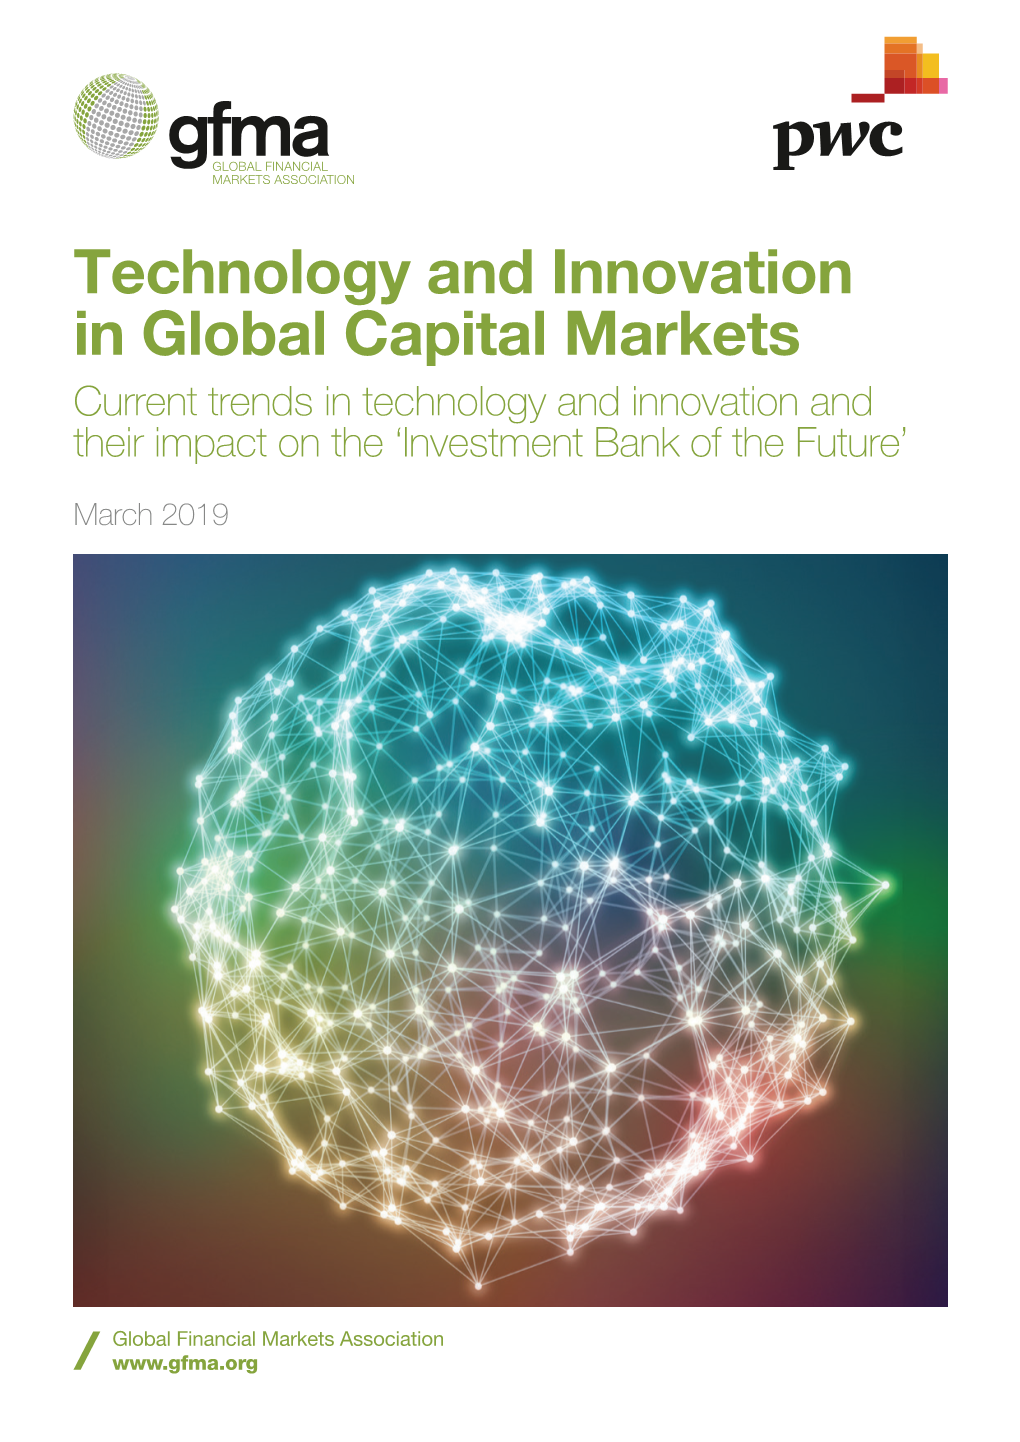 Technology and Innovation in Global Capital Markets Current Trends in Technology and Innovation and Their Impact on the ‘Investment Bank of the Future’